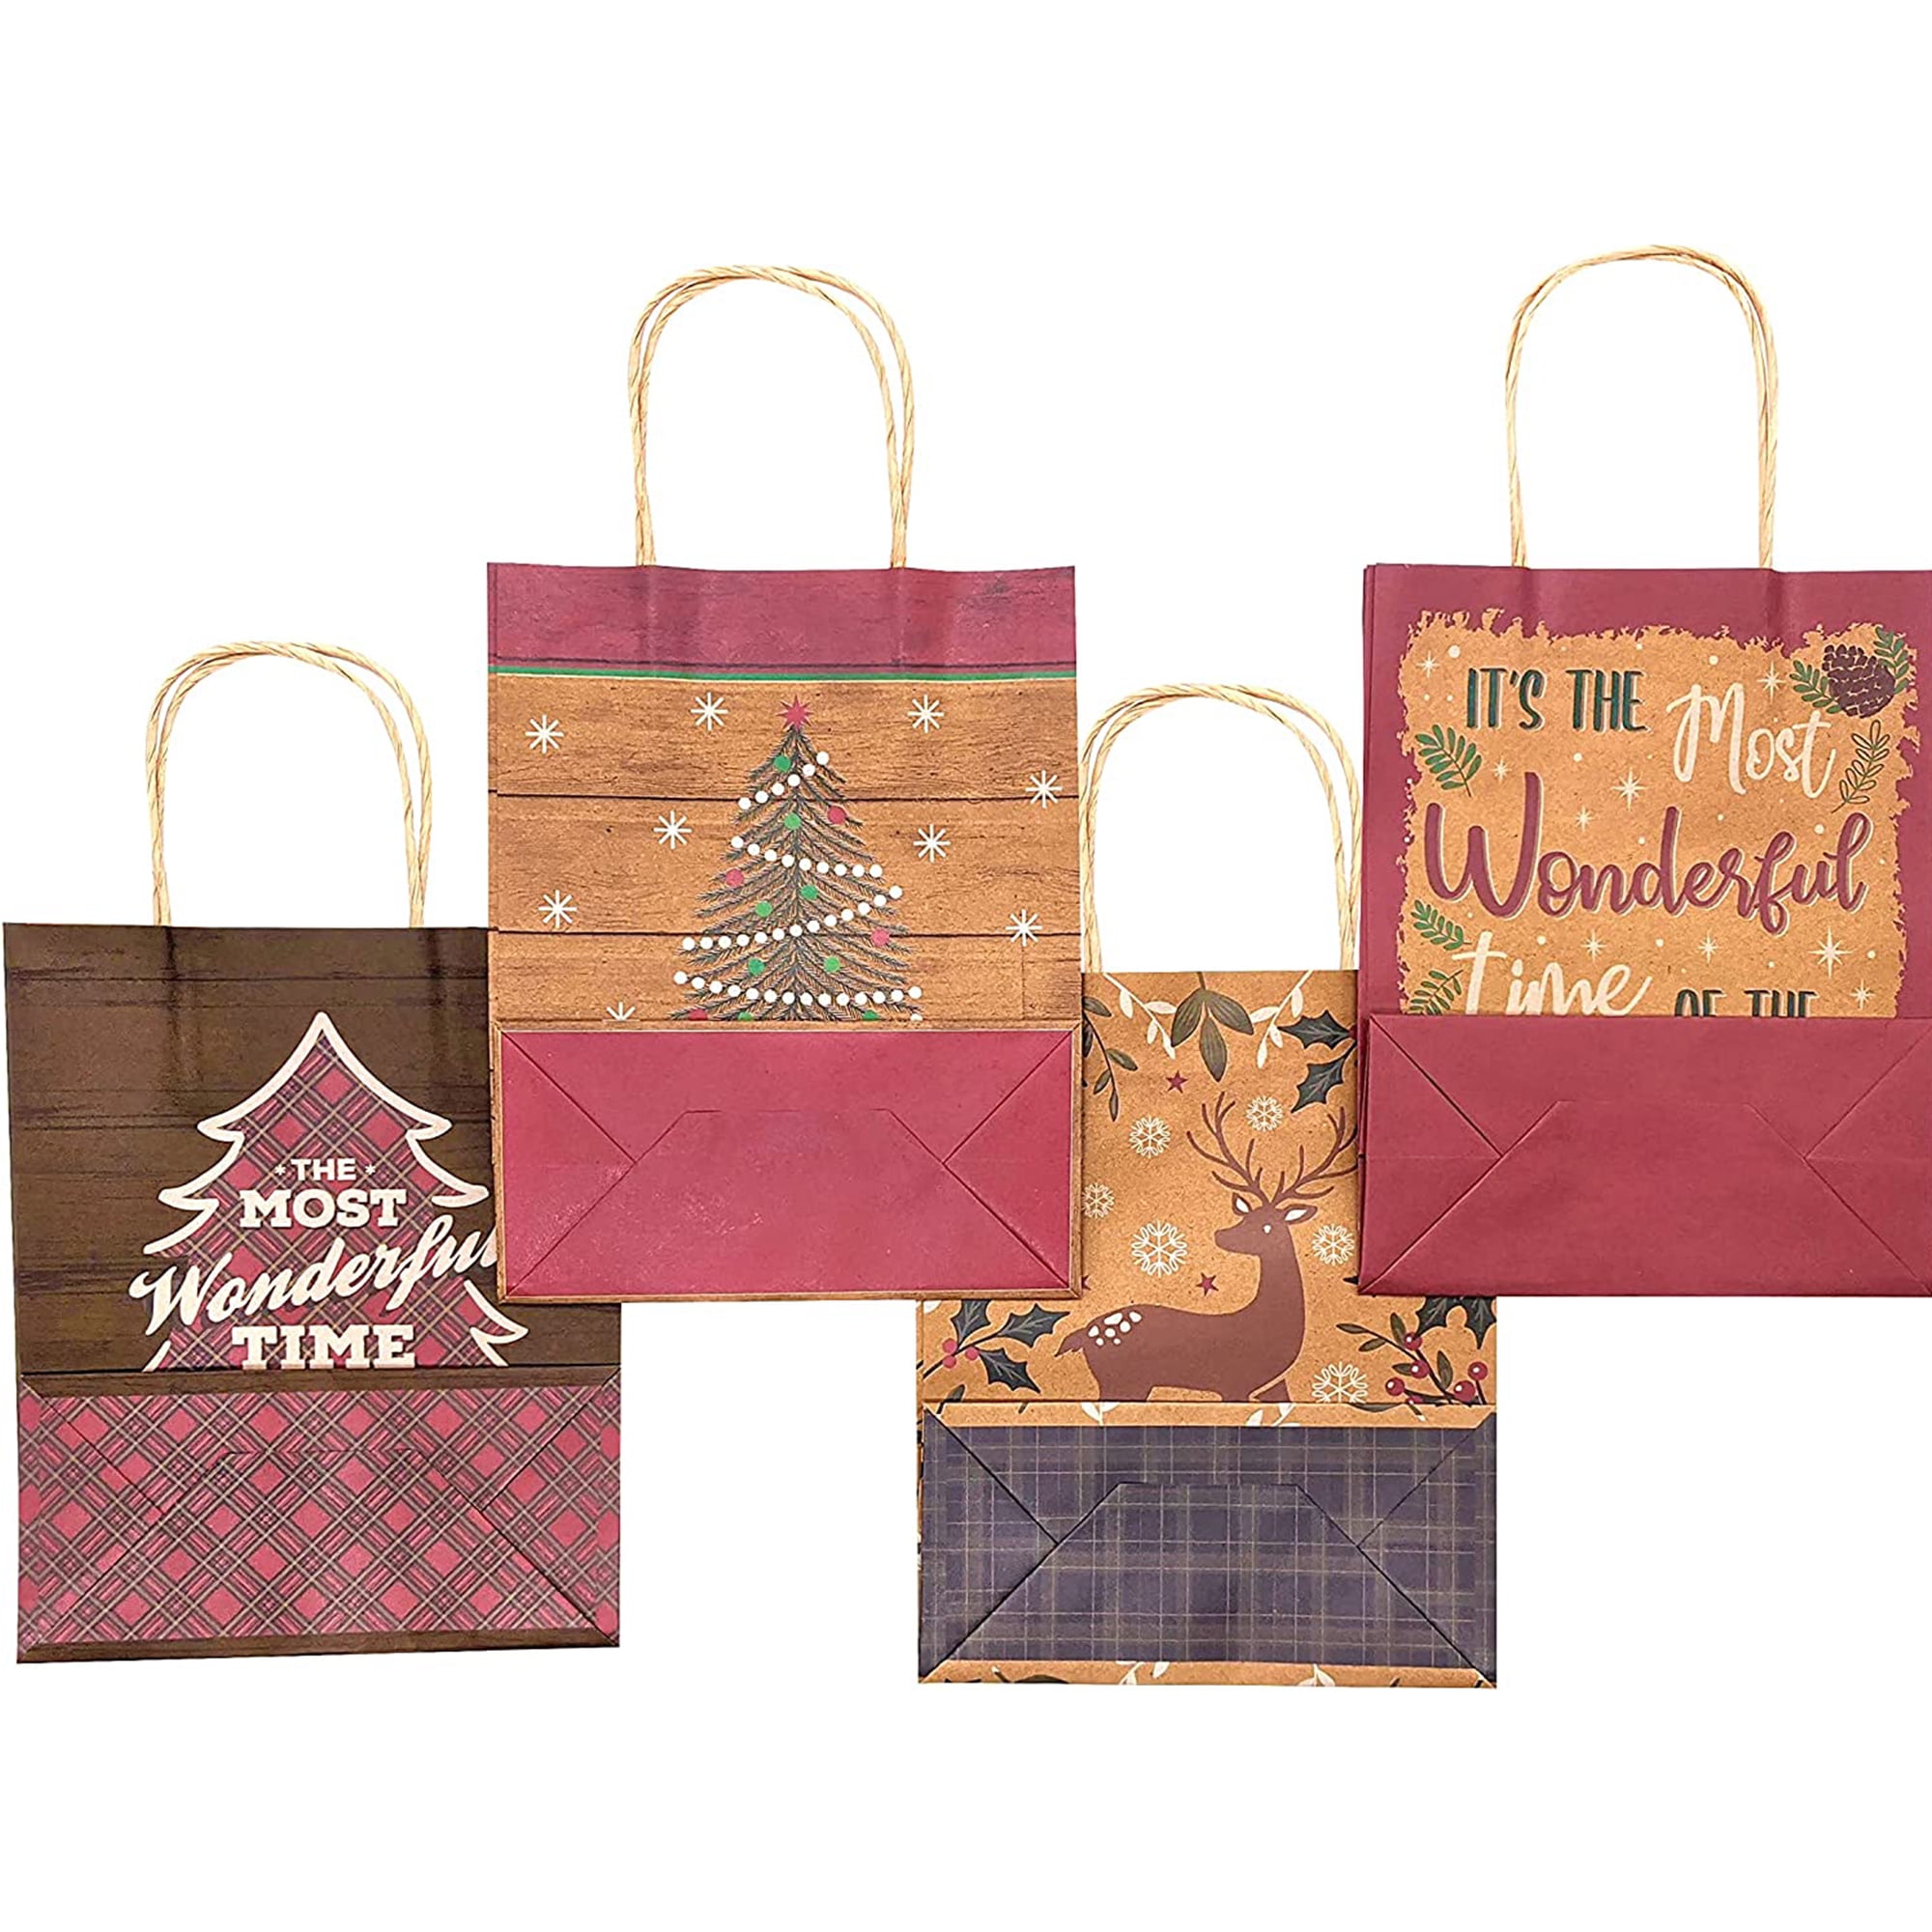 7-ELEVEn® Gift Bags (Set of 3)